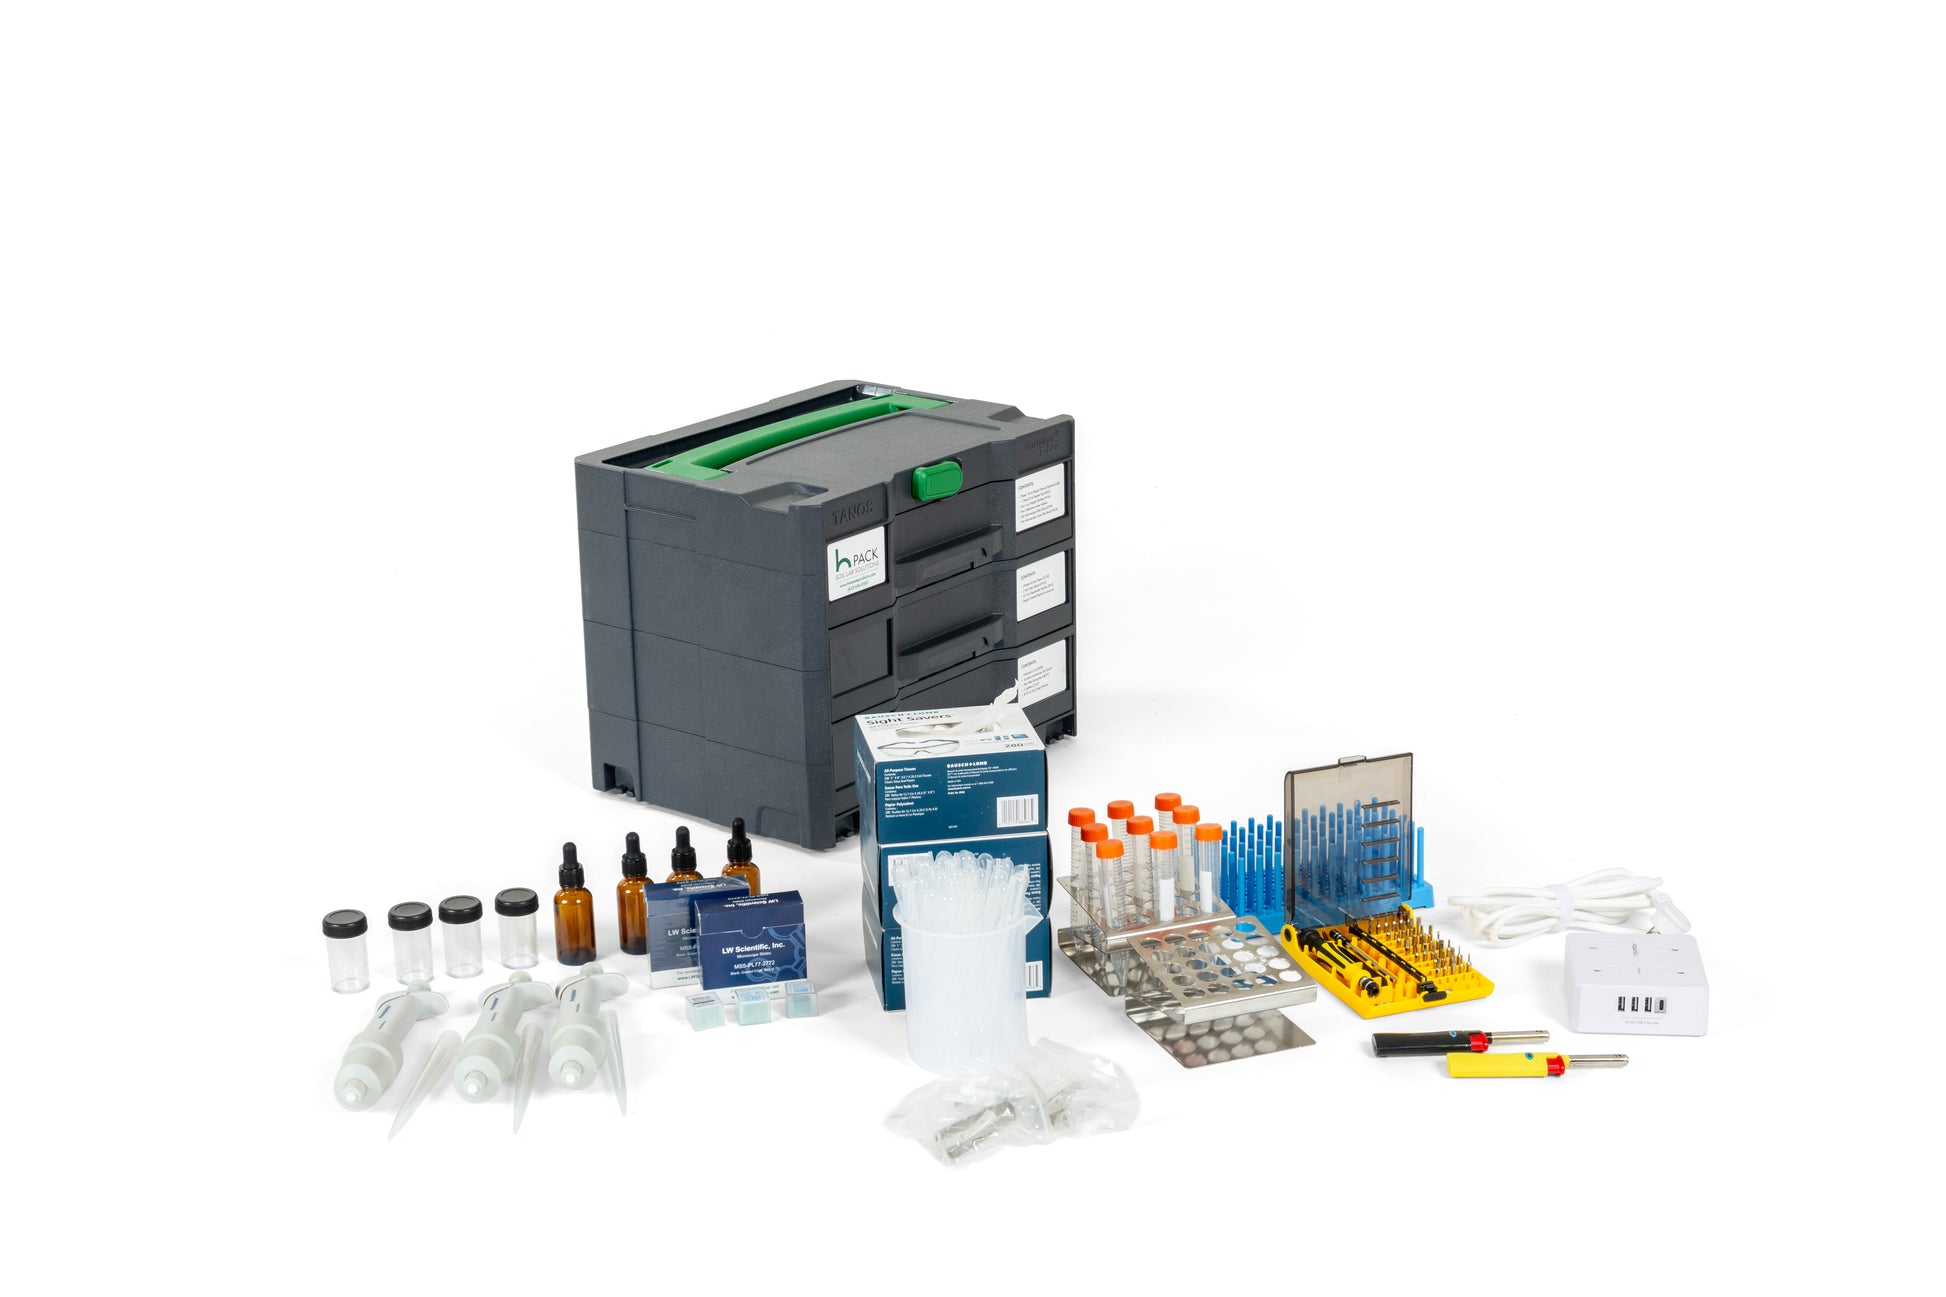 Maximize your hPACK with our Three-Drawer Case – the perfect addition for streamlined soil lab work. Customizable accessory options ensure you have everything you need at your fingertips. This versatile storage solution will efficiently organize your lab essentials and elevate your experience.